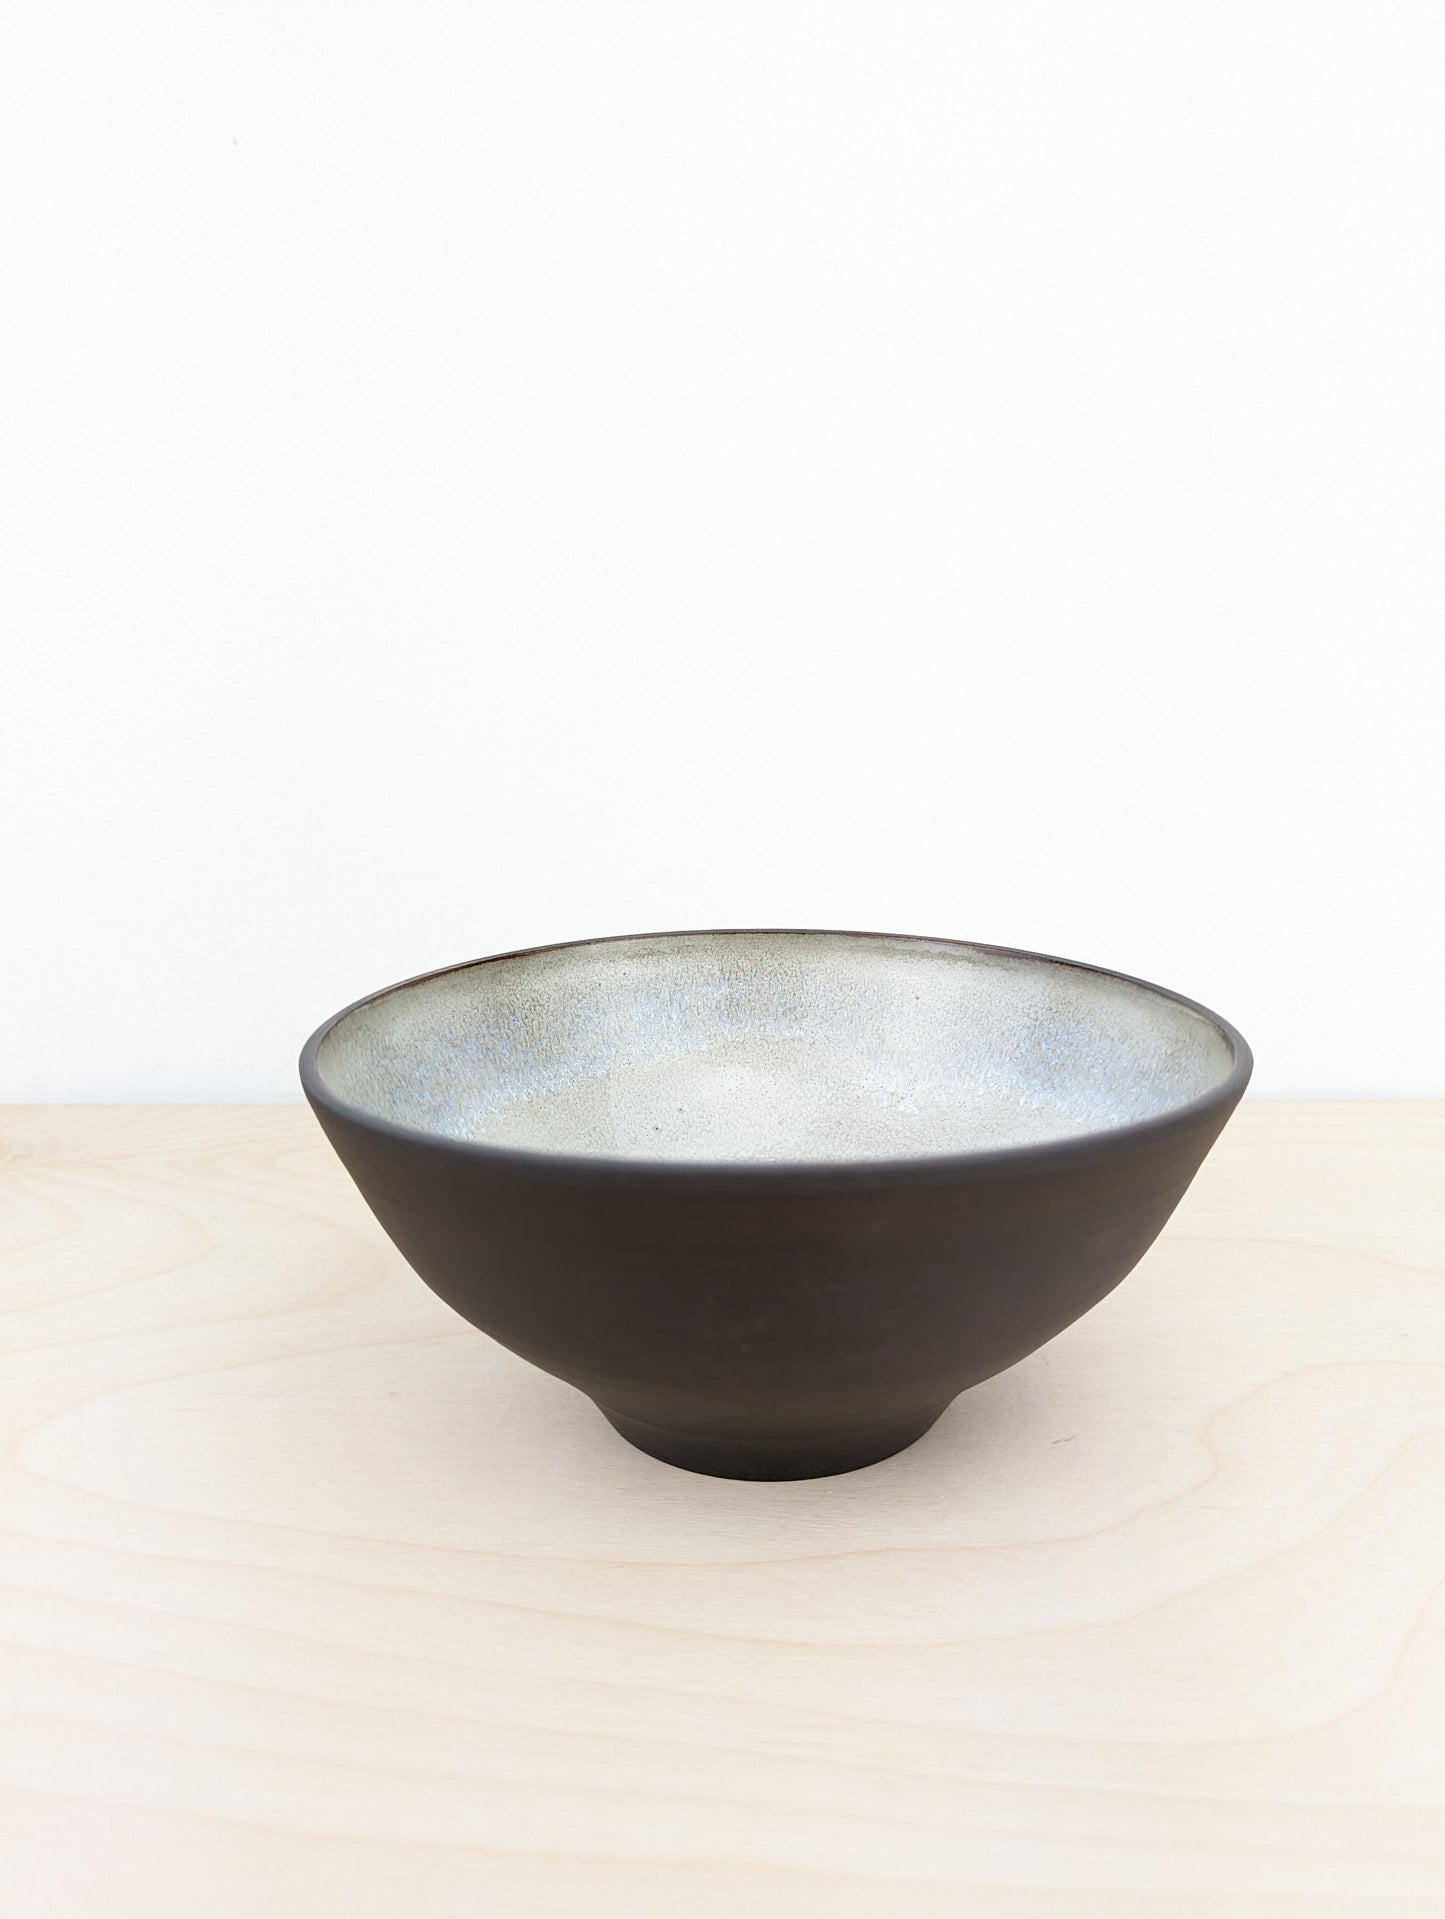 Deep Brown Clay and White Glaze Bowl